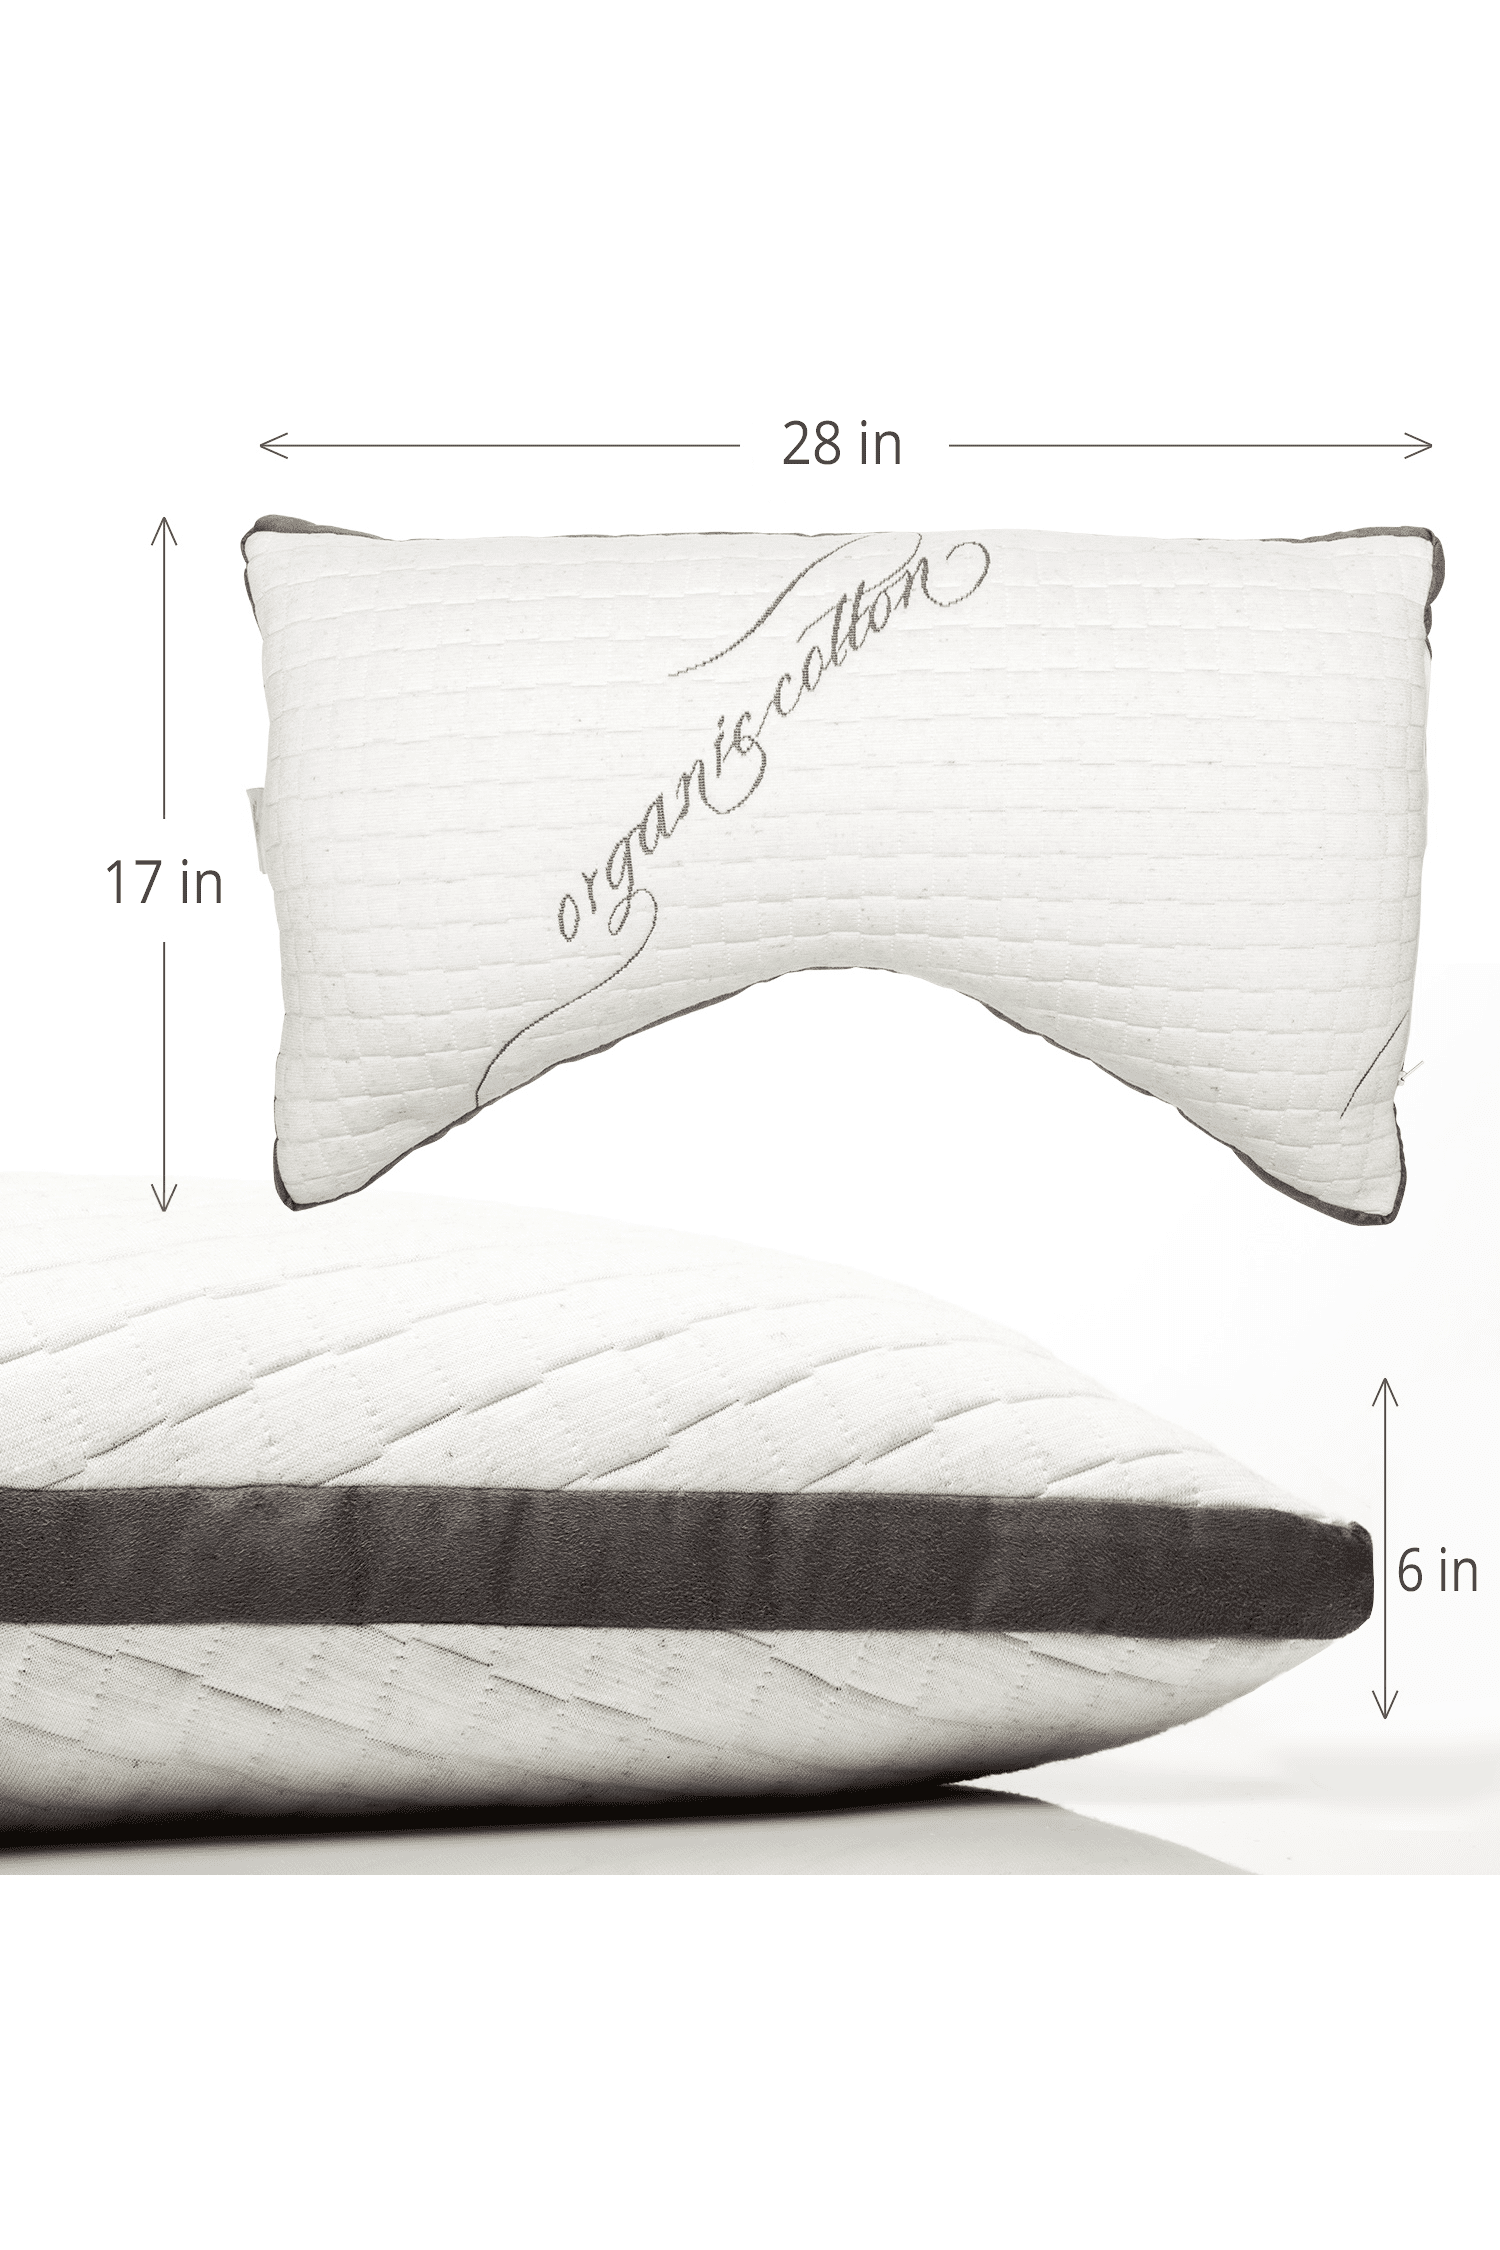 Natural Latex Side Sleeper Pillow - For Neck, Shoulder and Back